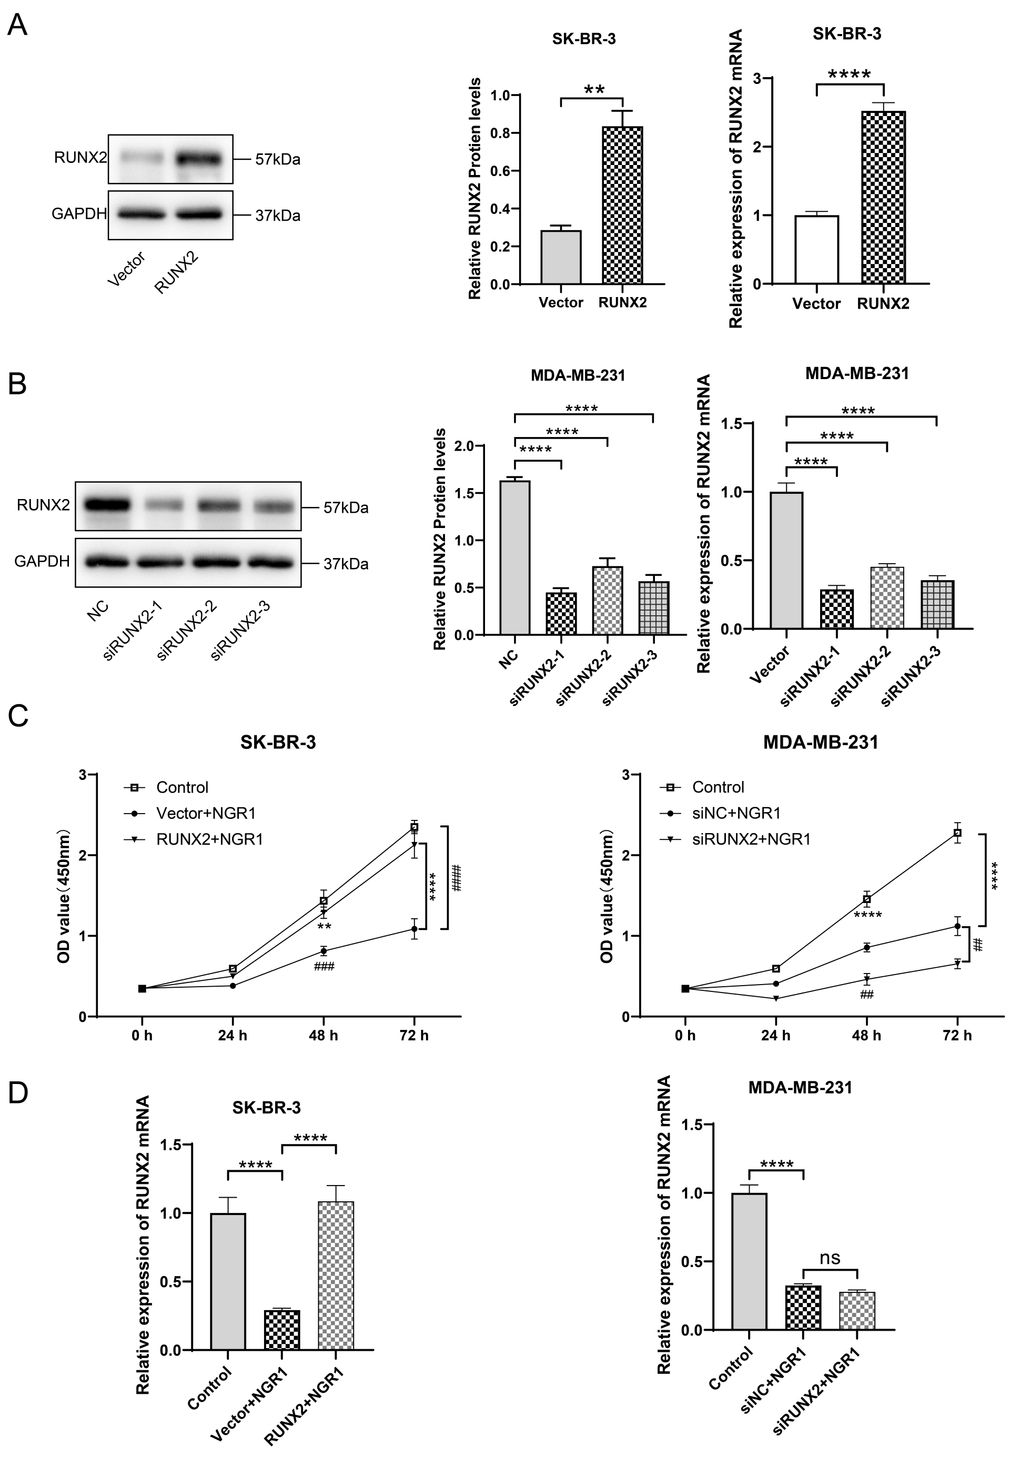 NGR1 inhibits breast cancer cell proliferation by down-regulating RUNX2 protein expression. (A) After transfection of overexpression RUNX2 plasmid (2 μg/mL) in SK-BR-3 cells for 48 h, the expression of RUNX2 protein and mRNA was detected by Western blot and QPCR assay. (B) After transfection of siRNA (100 nmol/L) in MDA-MB-231 cells for 48 h, the expression of RUNX2 protein and mRNA expression. (C) Breast cancer cells were transfected with overexpression plasmid and siRNA for 48 h of incubation, followed by NGR1 treatment for 24 h, 48 h, and 72 h. Changes in cell viability were detected by CCK8 assay. (D) Expression levels of RUNX2 mRNA were detected by QPCR assay to examine the expression levels of RUNX2 mRNA in breast cancer cell lines. (* P ** P *** P **** P # P ## P ### P #### P 